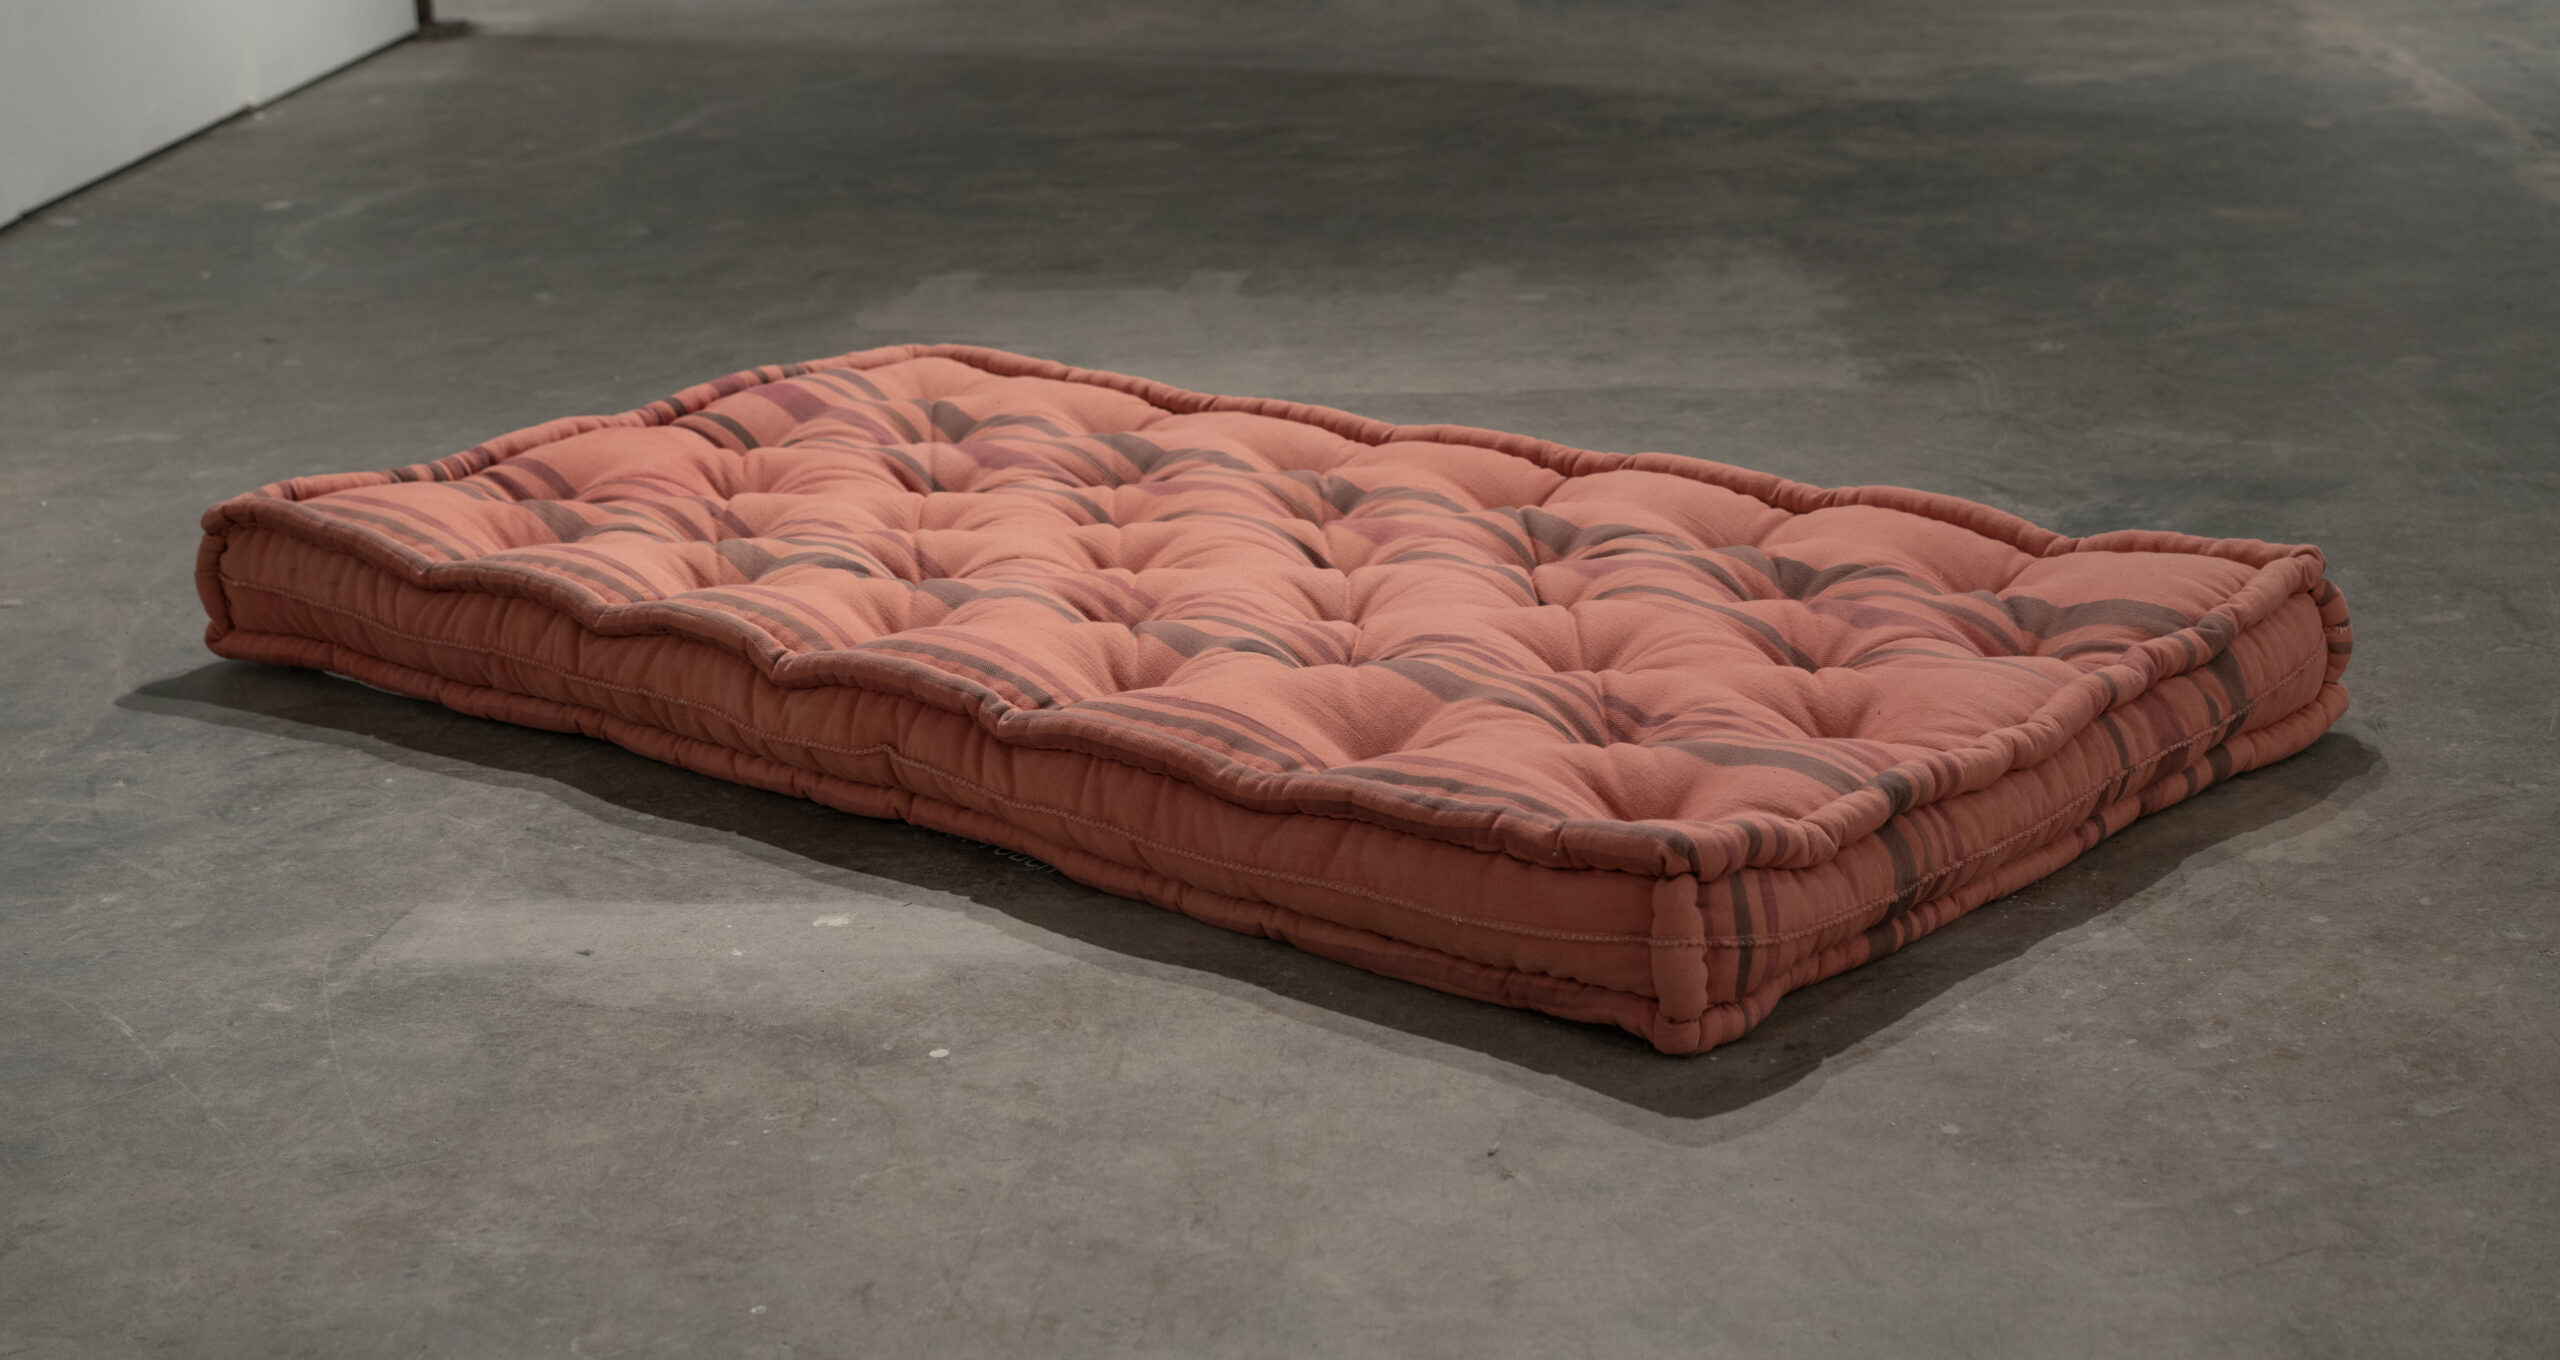 Rust-colored, tufted mattress on gray floor.